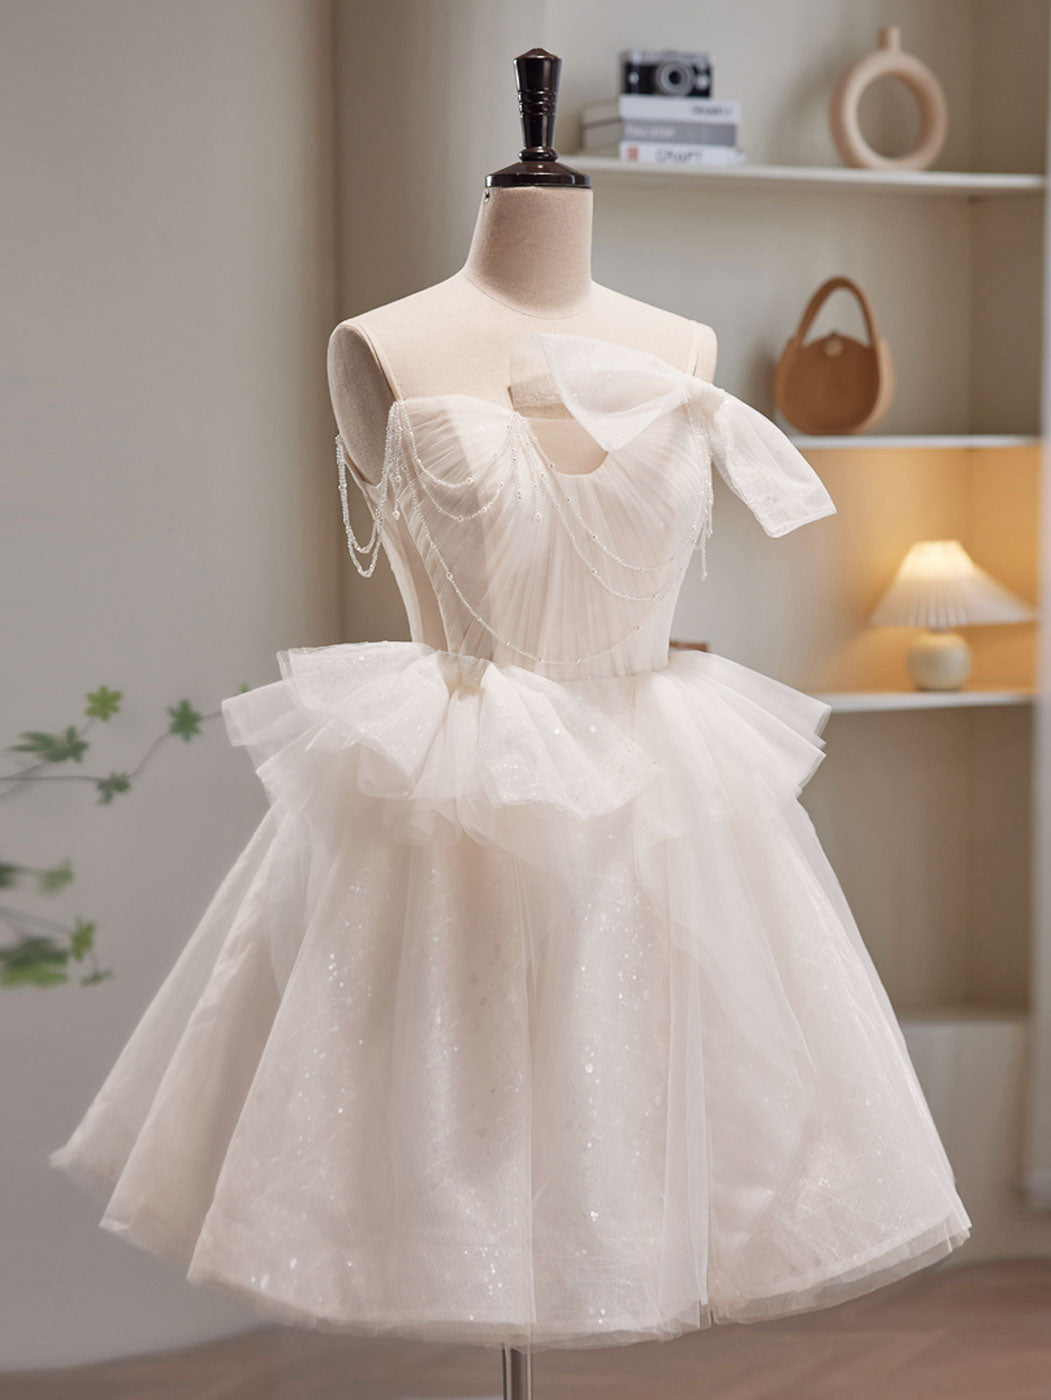 Sweet Strapless White Short Homecoming Dress  - DollyGown